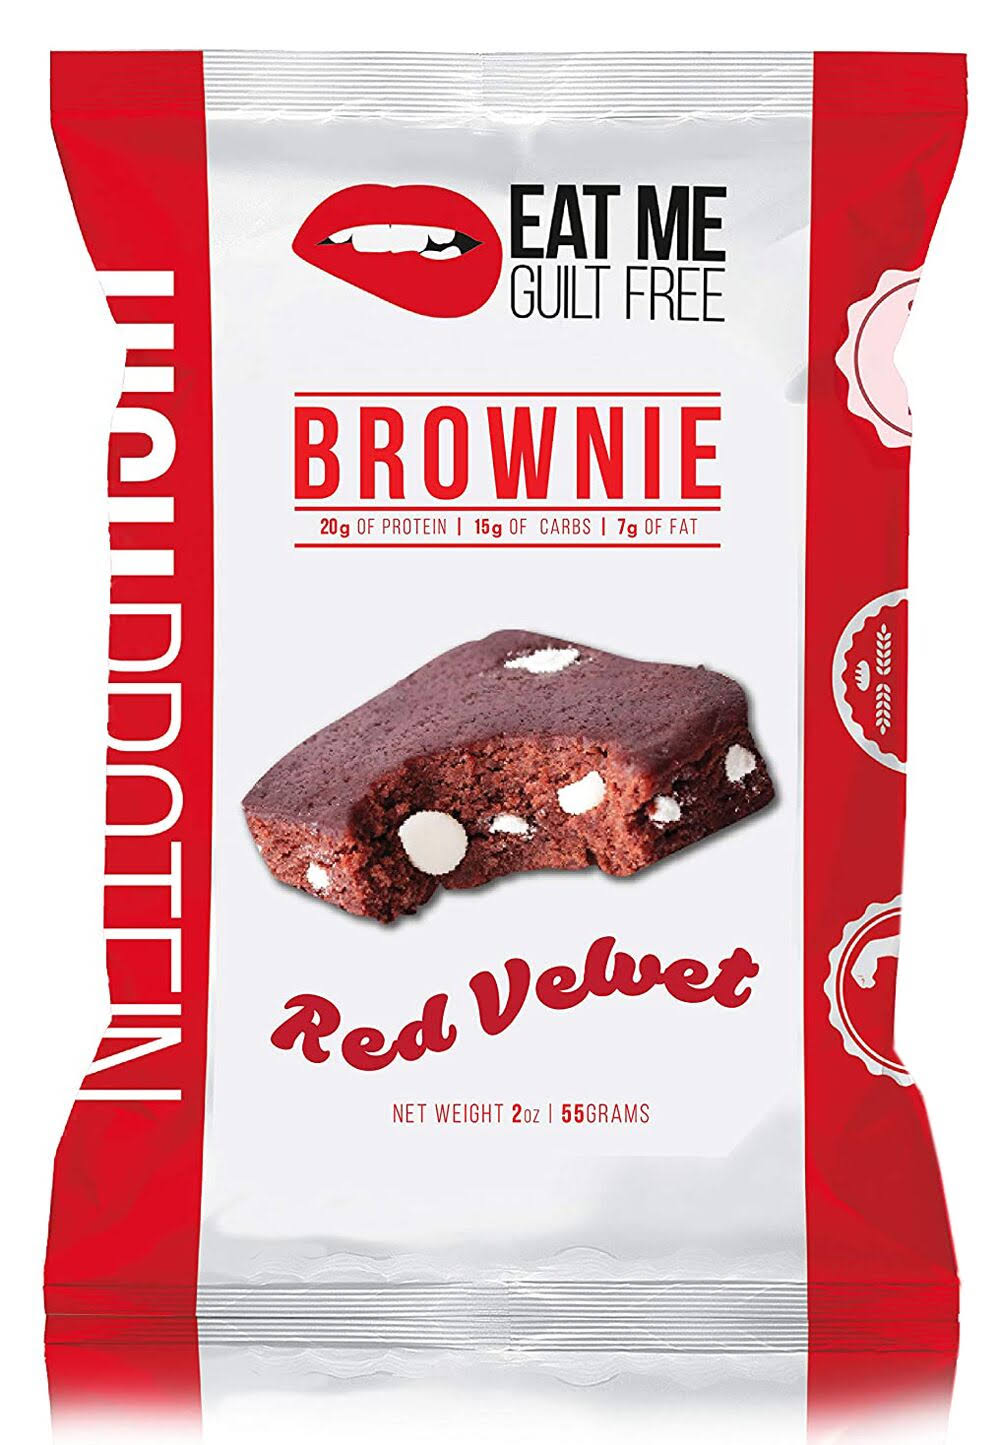 Eat Me Brownie, Chocolate Peanut Butter Bliss - 2 oz